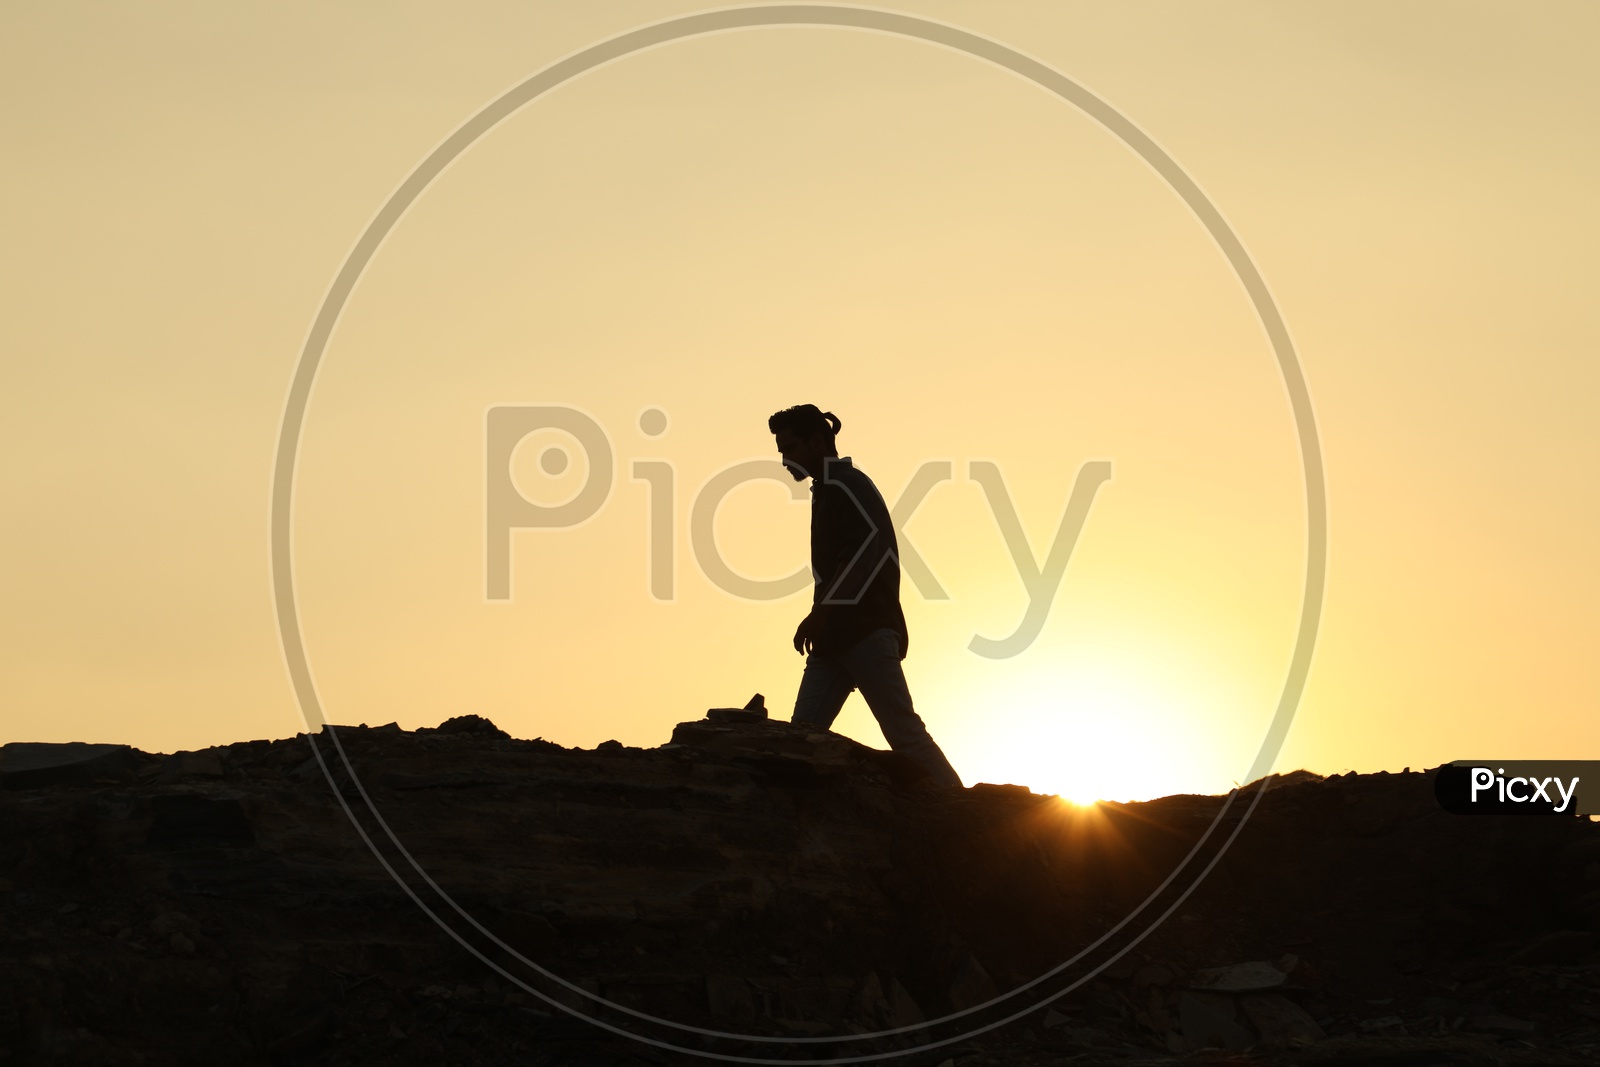 Silhouette of a man with sun in background